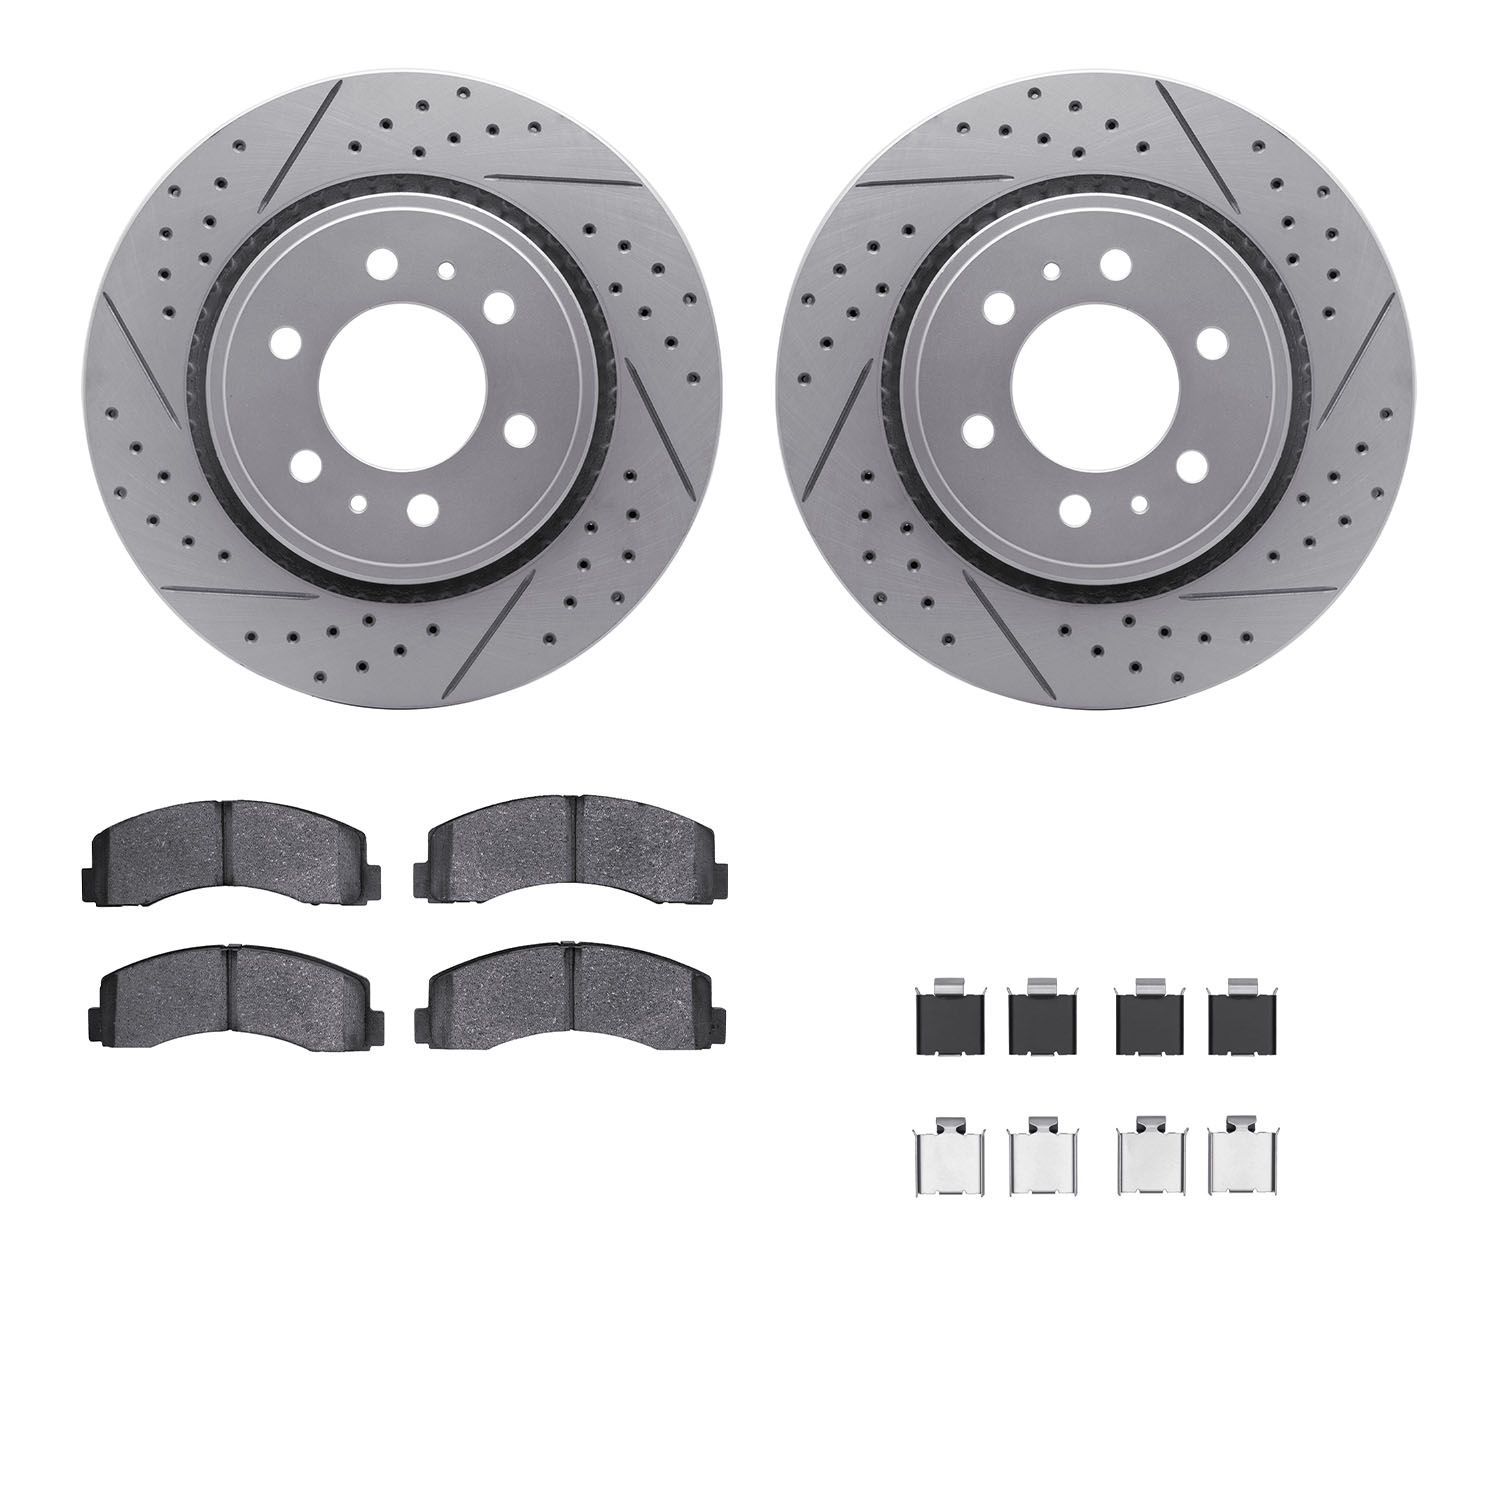 2212-99165 Geoperformance Drilled/Slotted Rotors w/Heavy-Duty Pads Kit & Hardware, 2010-2021 Ford/Lincoln/Mercury/Mazda, Positio